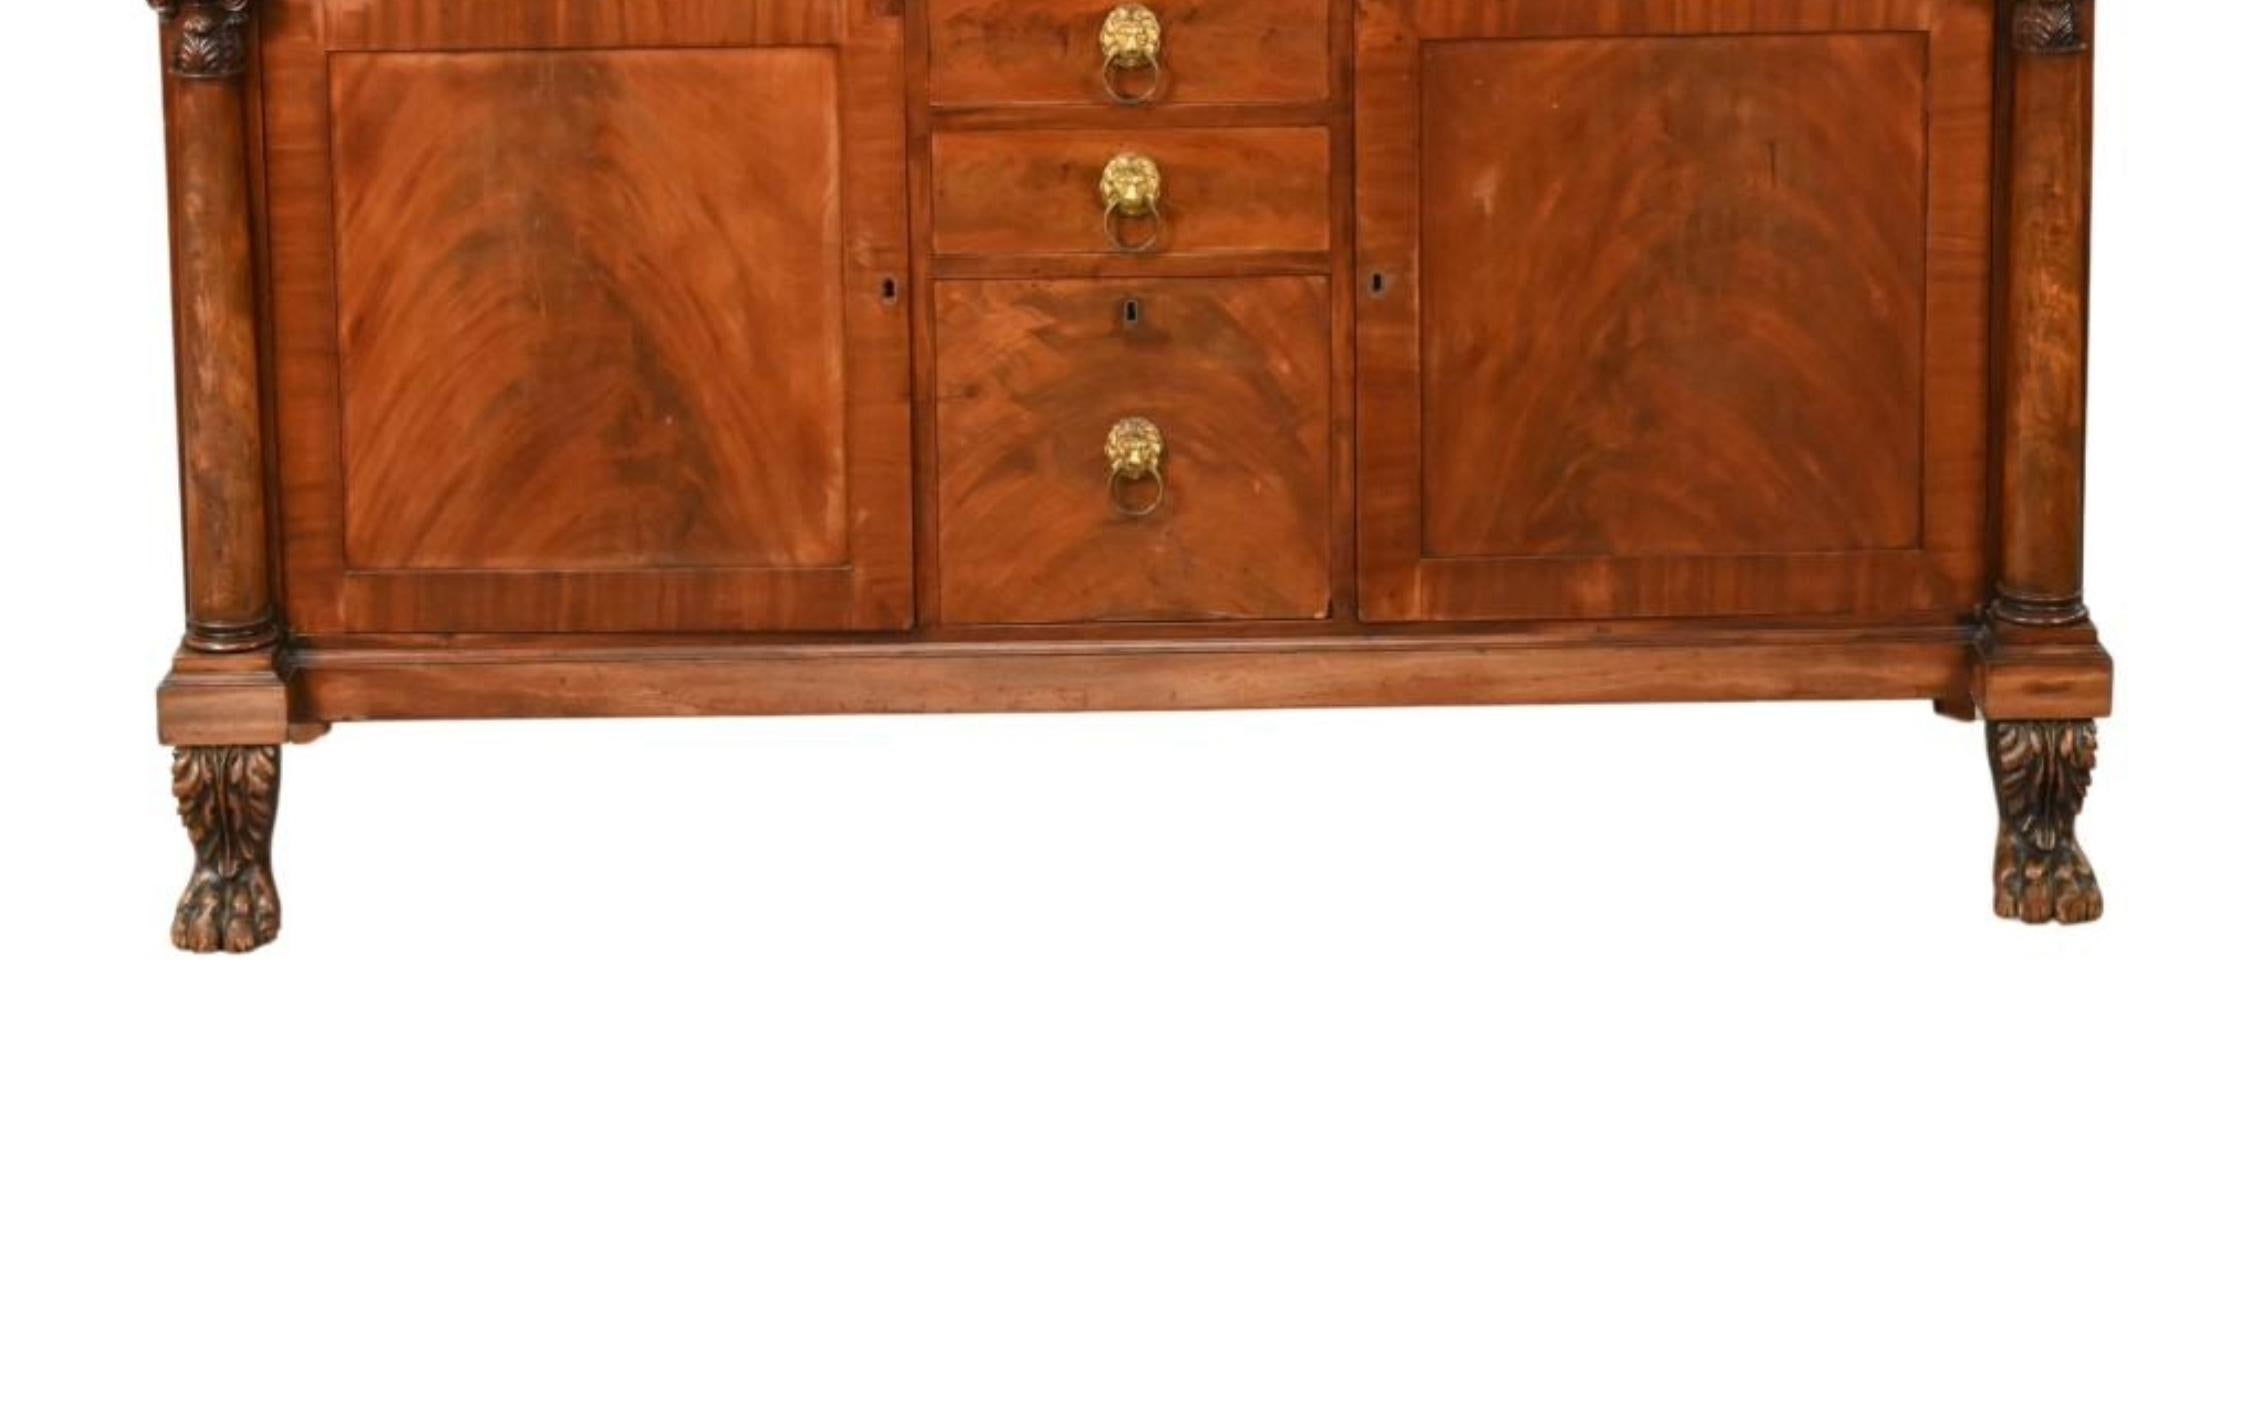 Hand-Carved Antique Mahogany Wood Federal Style Credenza / Sideboard For Sale